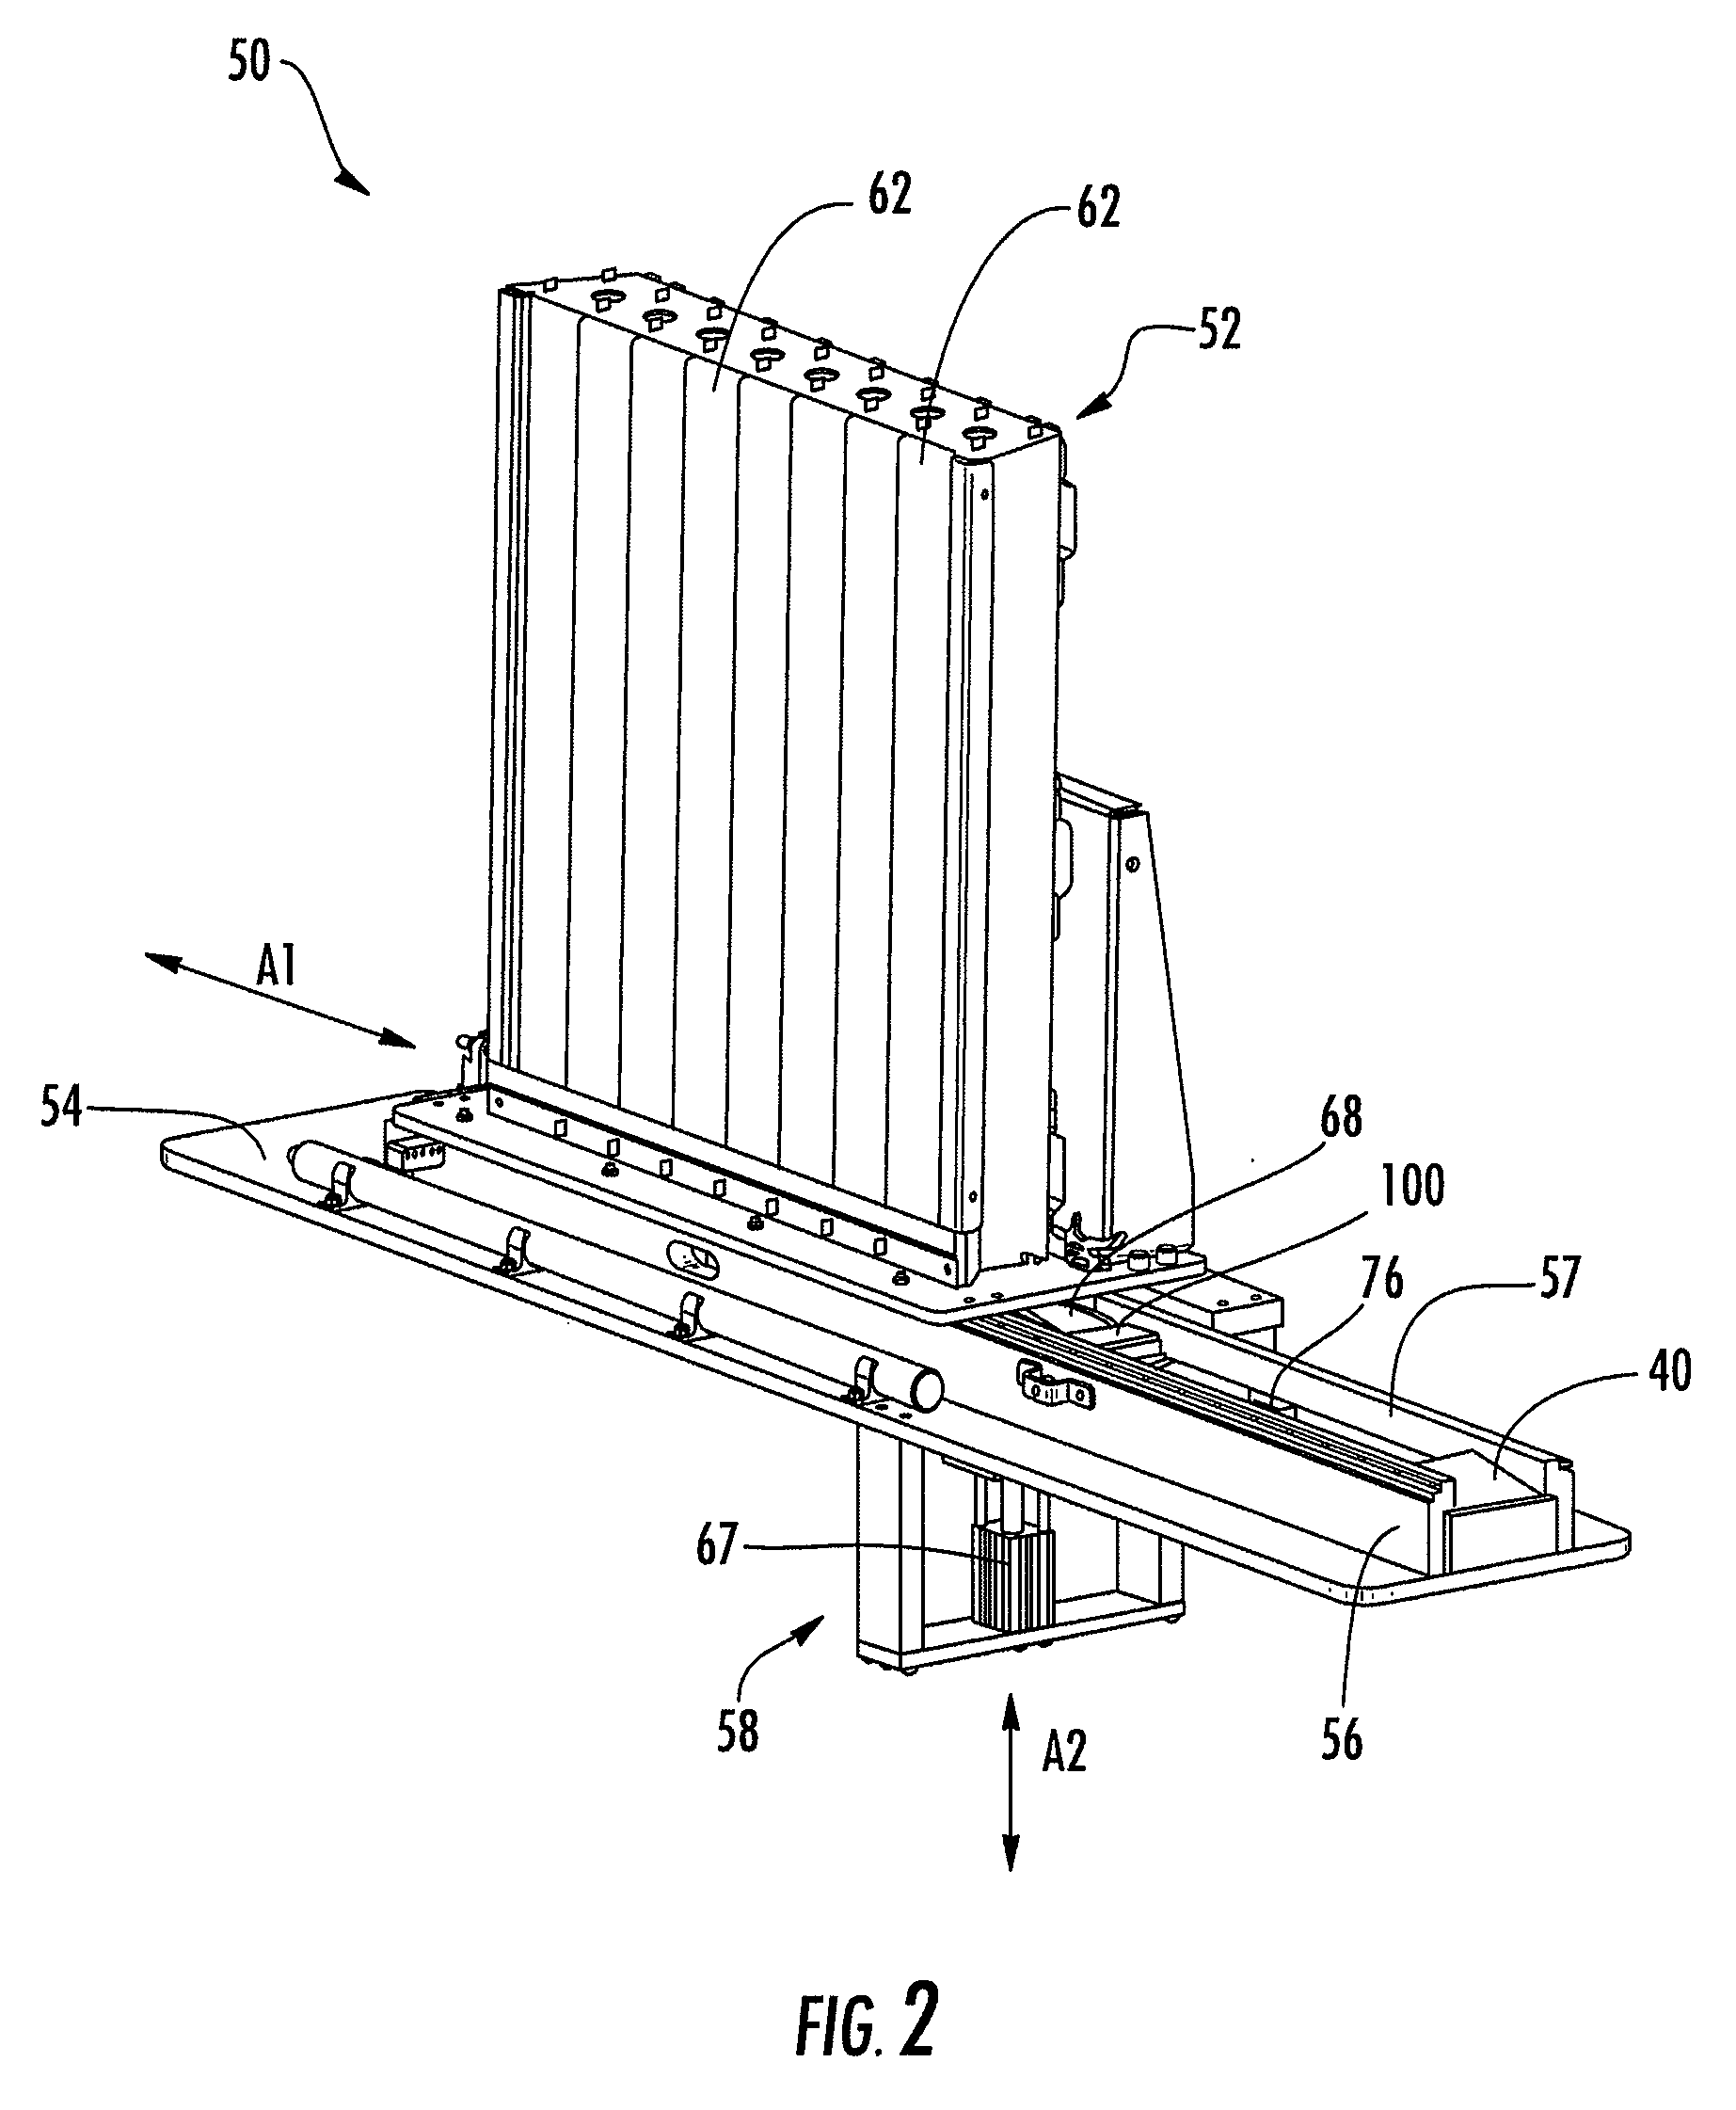 Method of handling clamshell containers containing a particulate aliquot